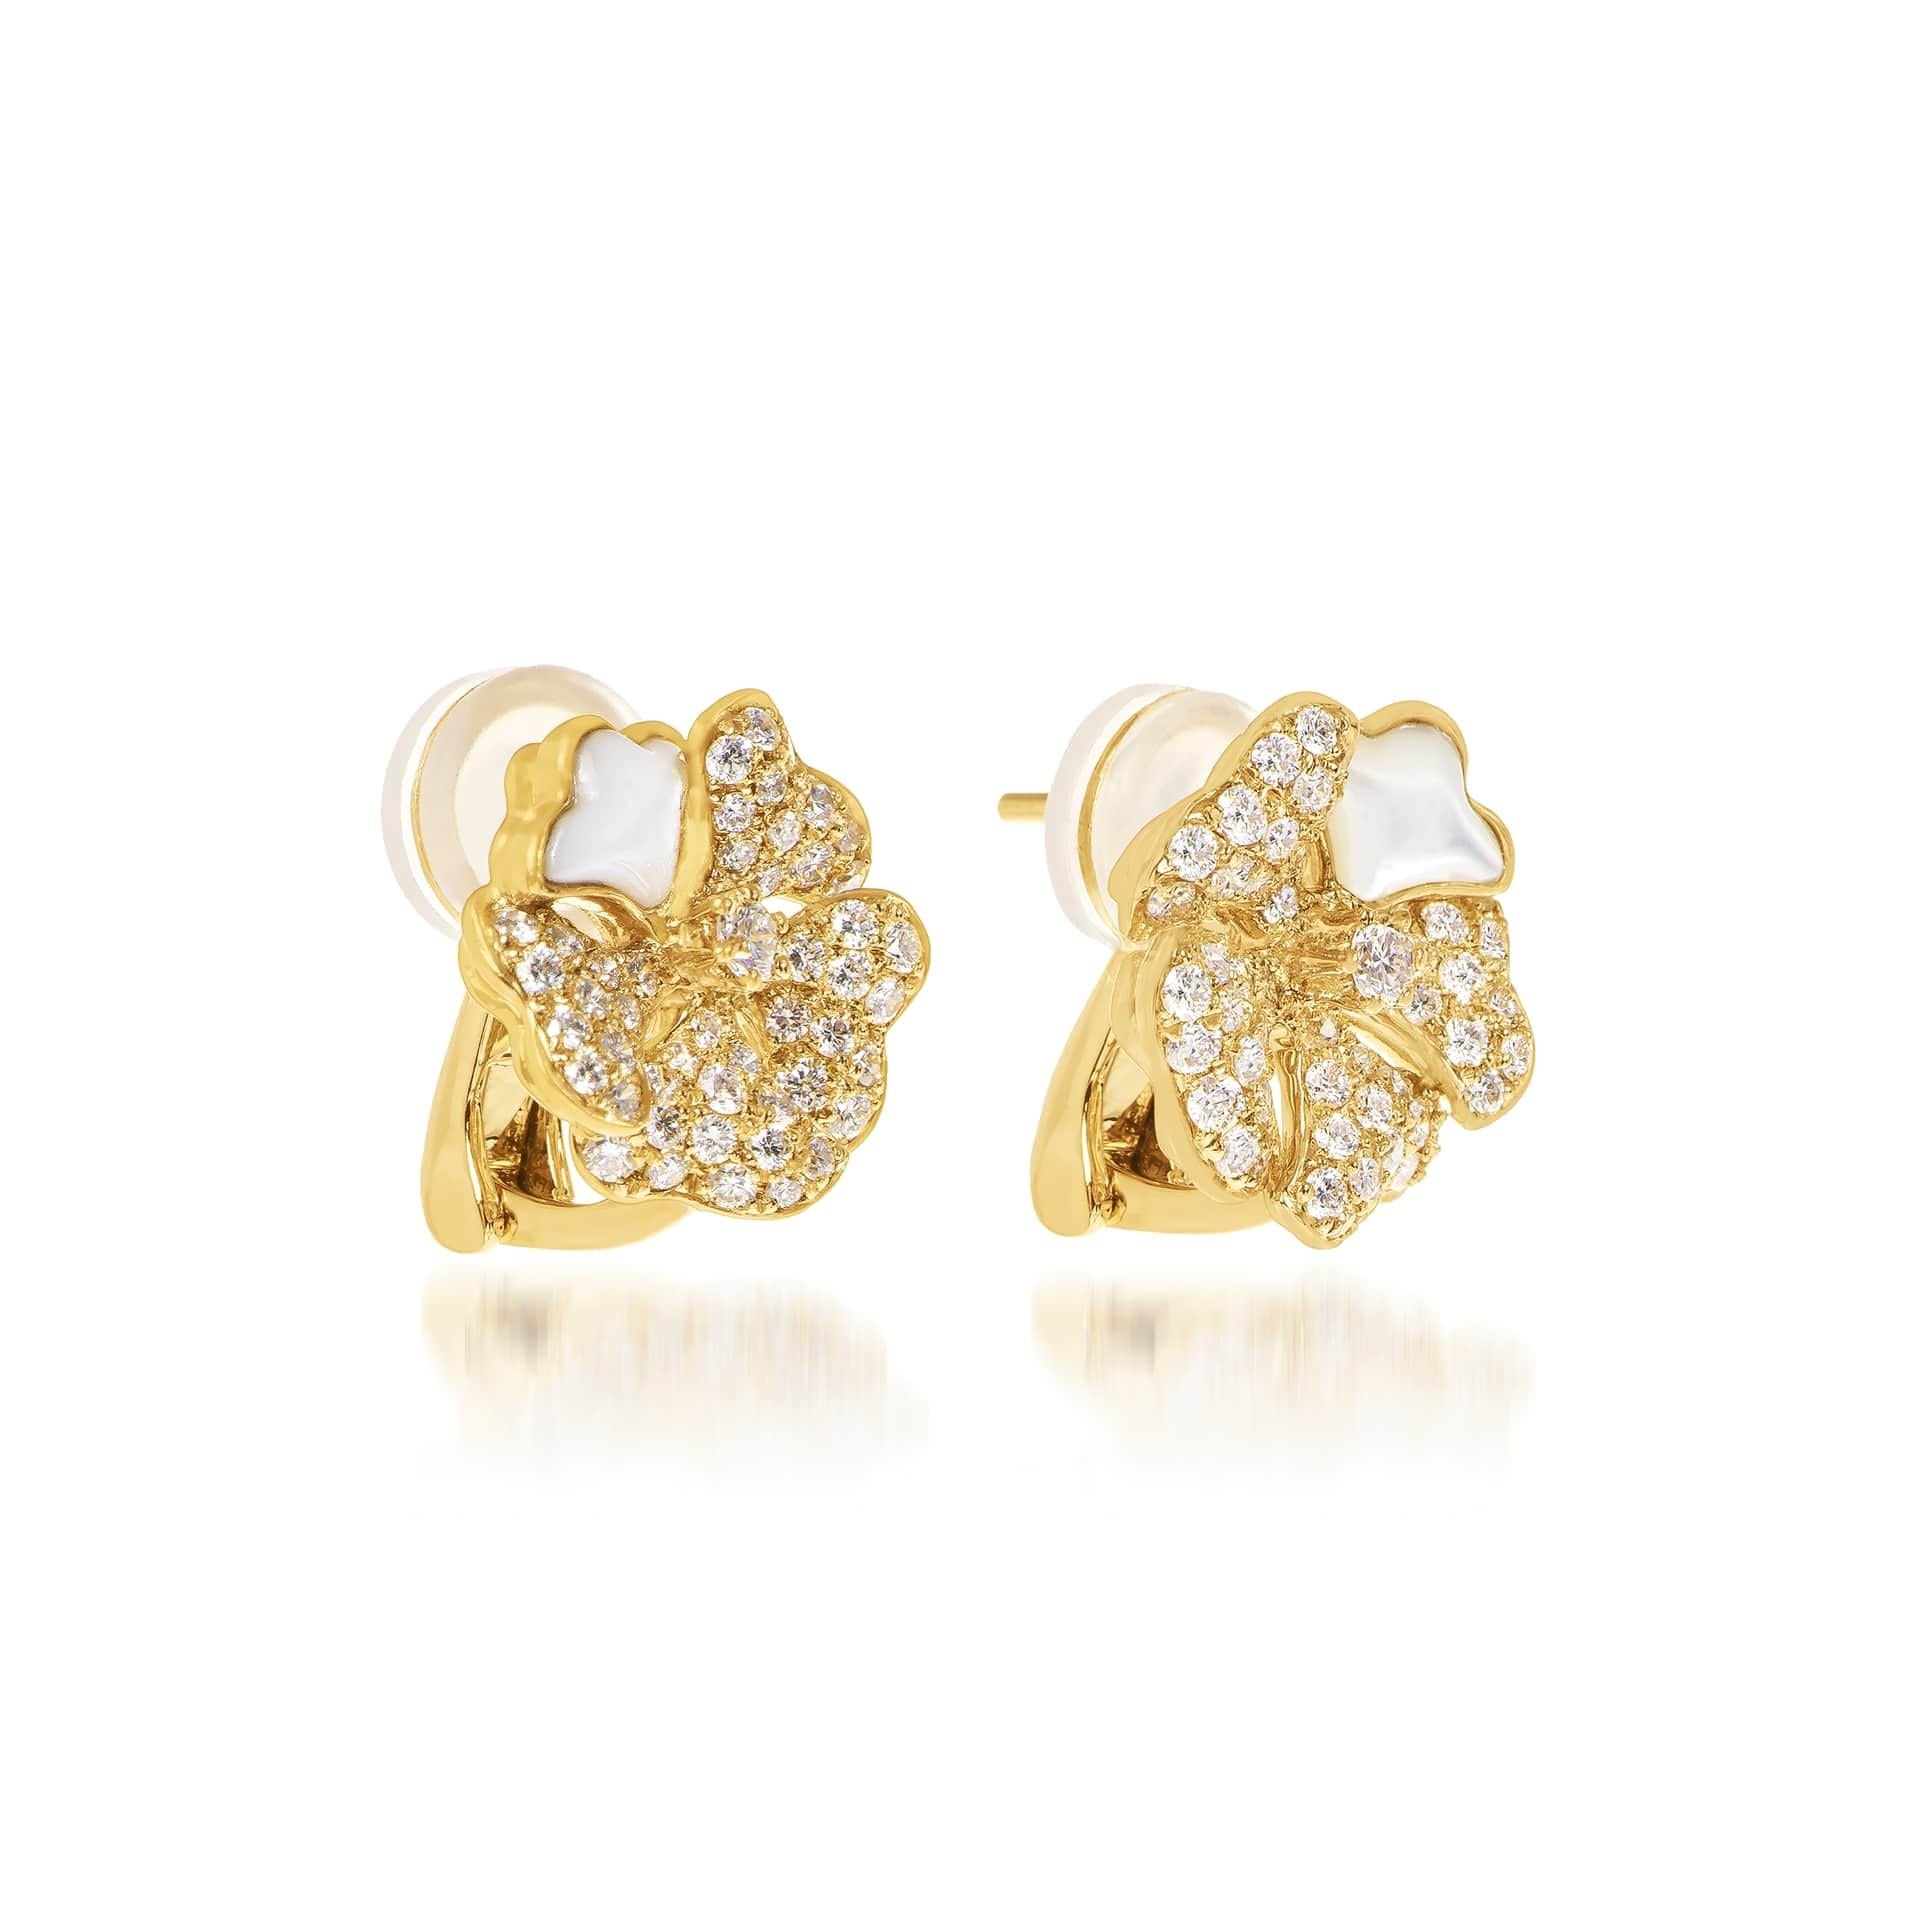 Bloom Diamond and White Mother-of-Pearl Bloom Earring Tops in 18K Yellow Gold

Inspired by the exquisite petals of the alpine cinquefoil, the Bloom collection contrasts the richness of diamonds and precious metals with the light versatility of this